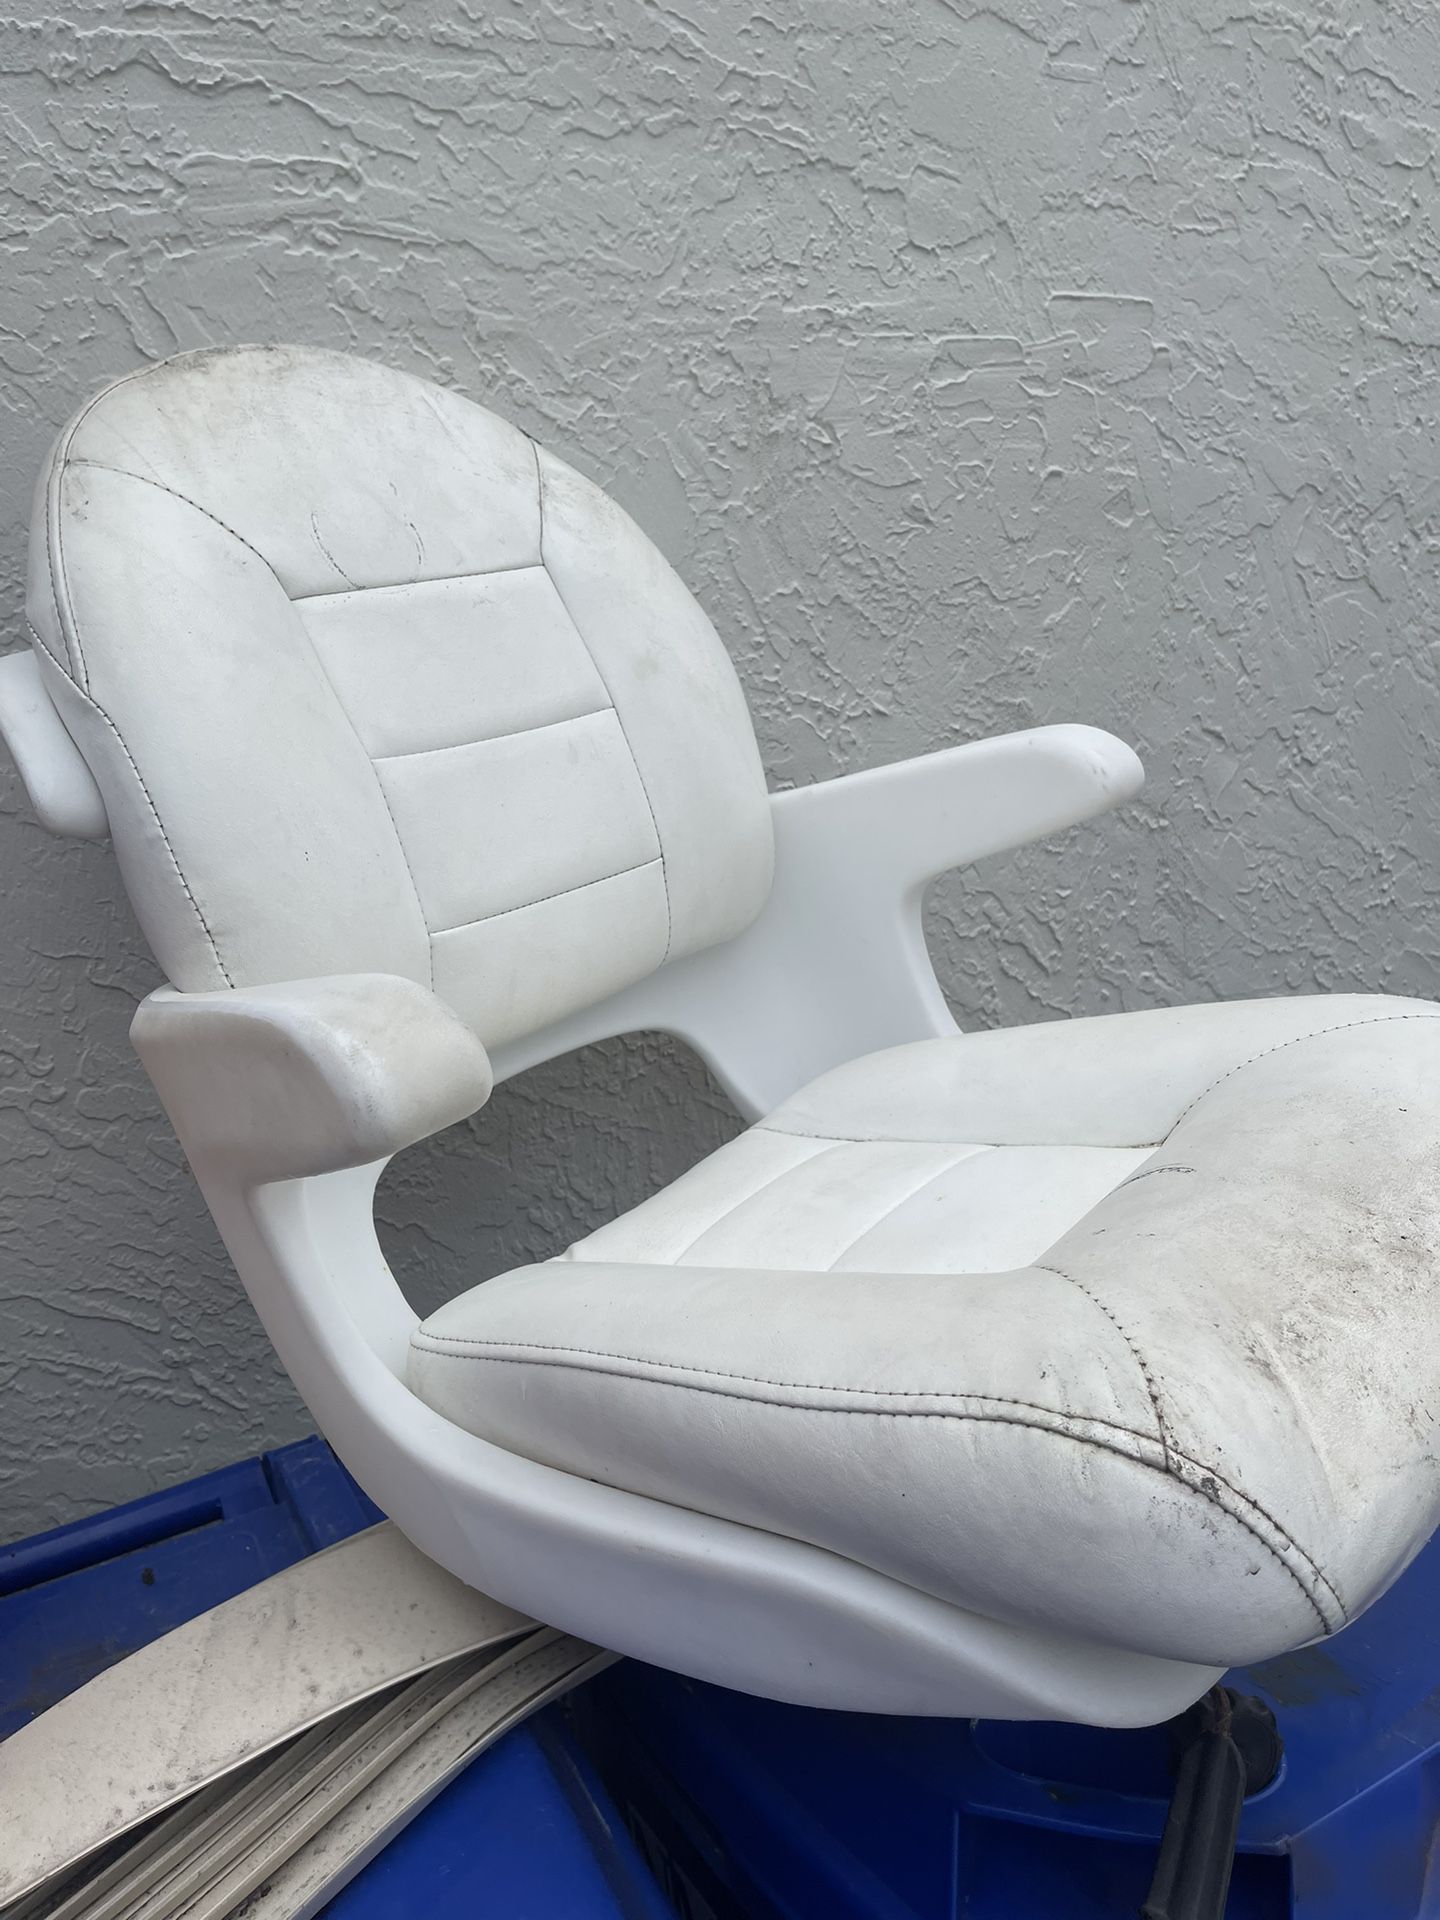 Boat Captain Chair 